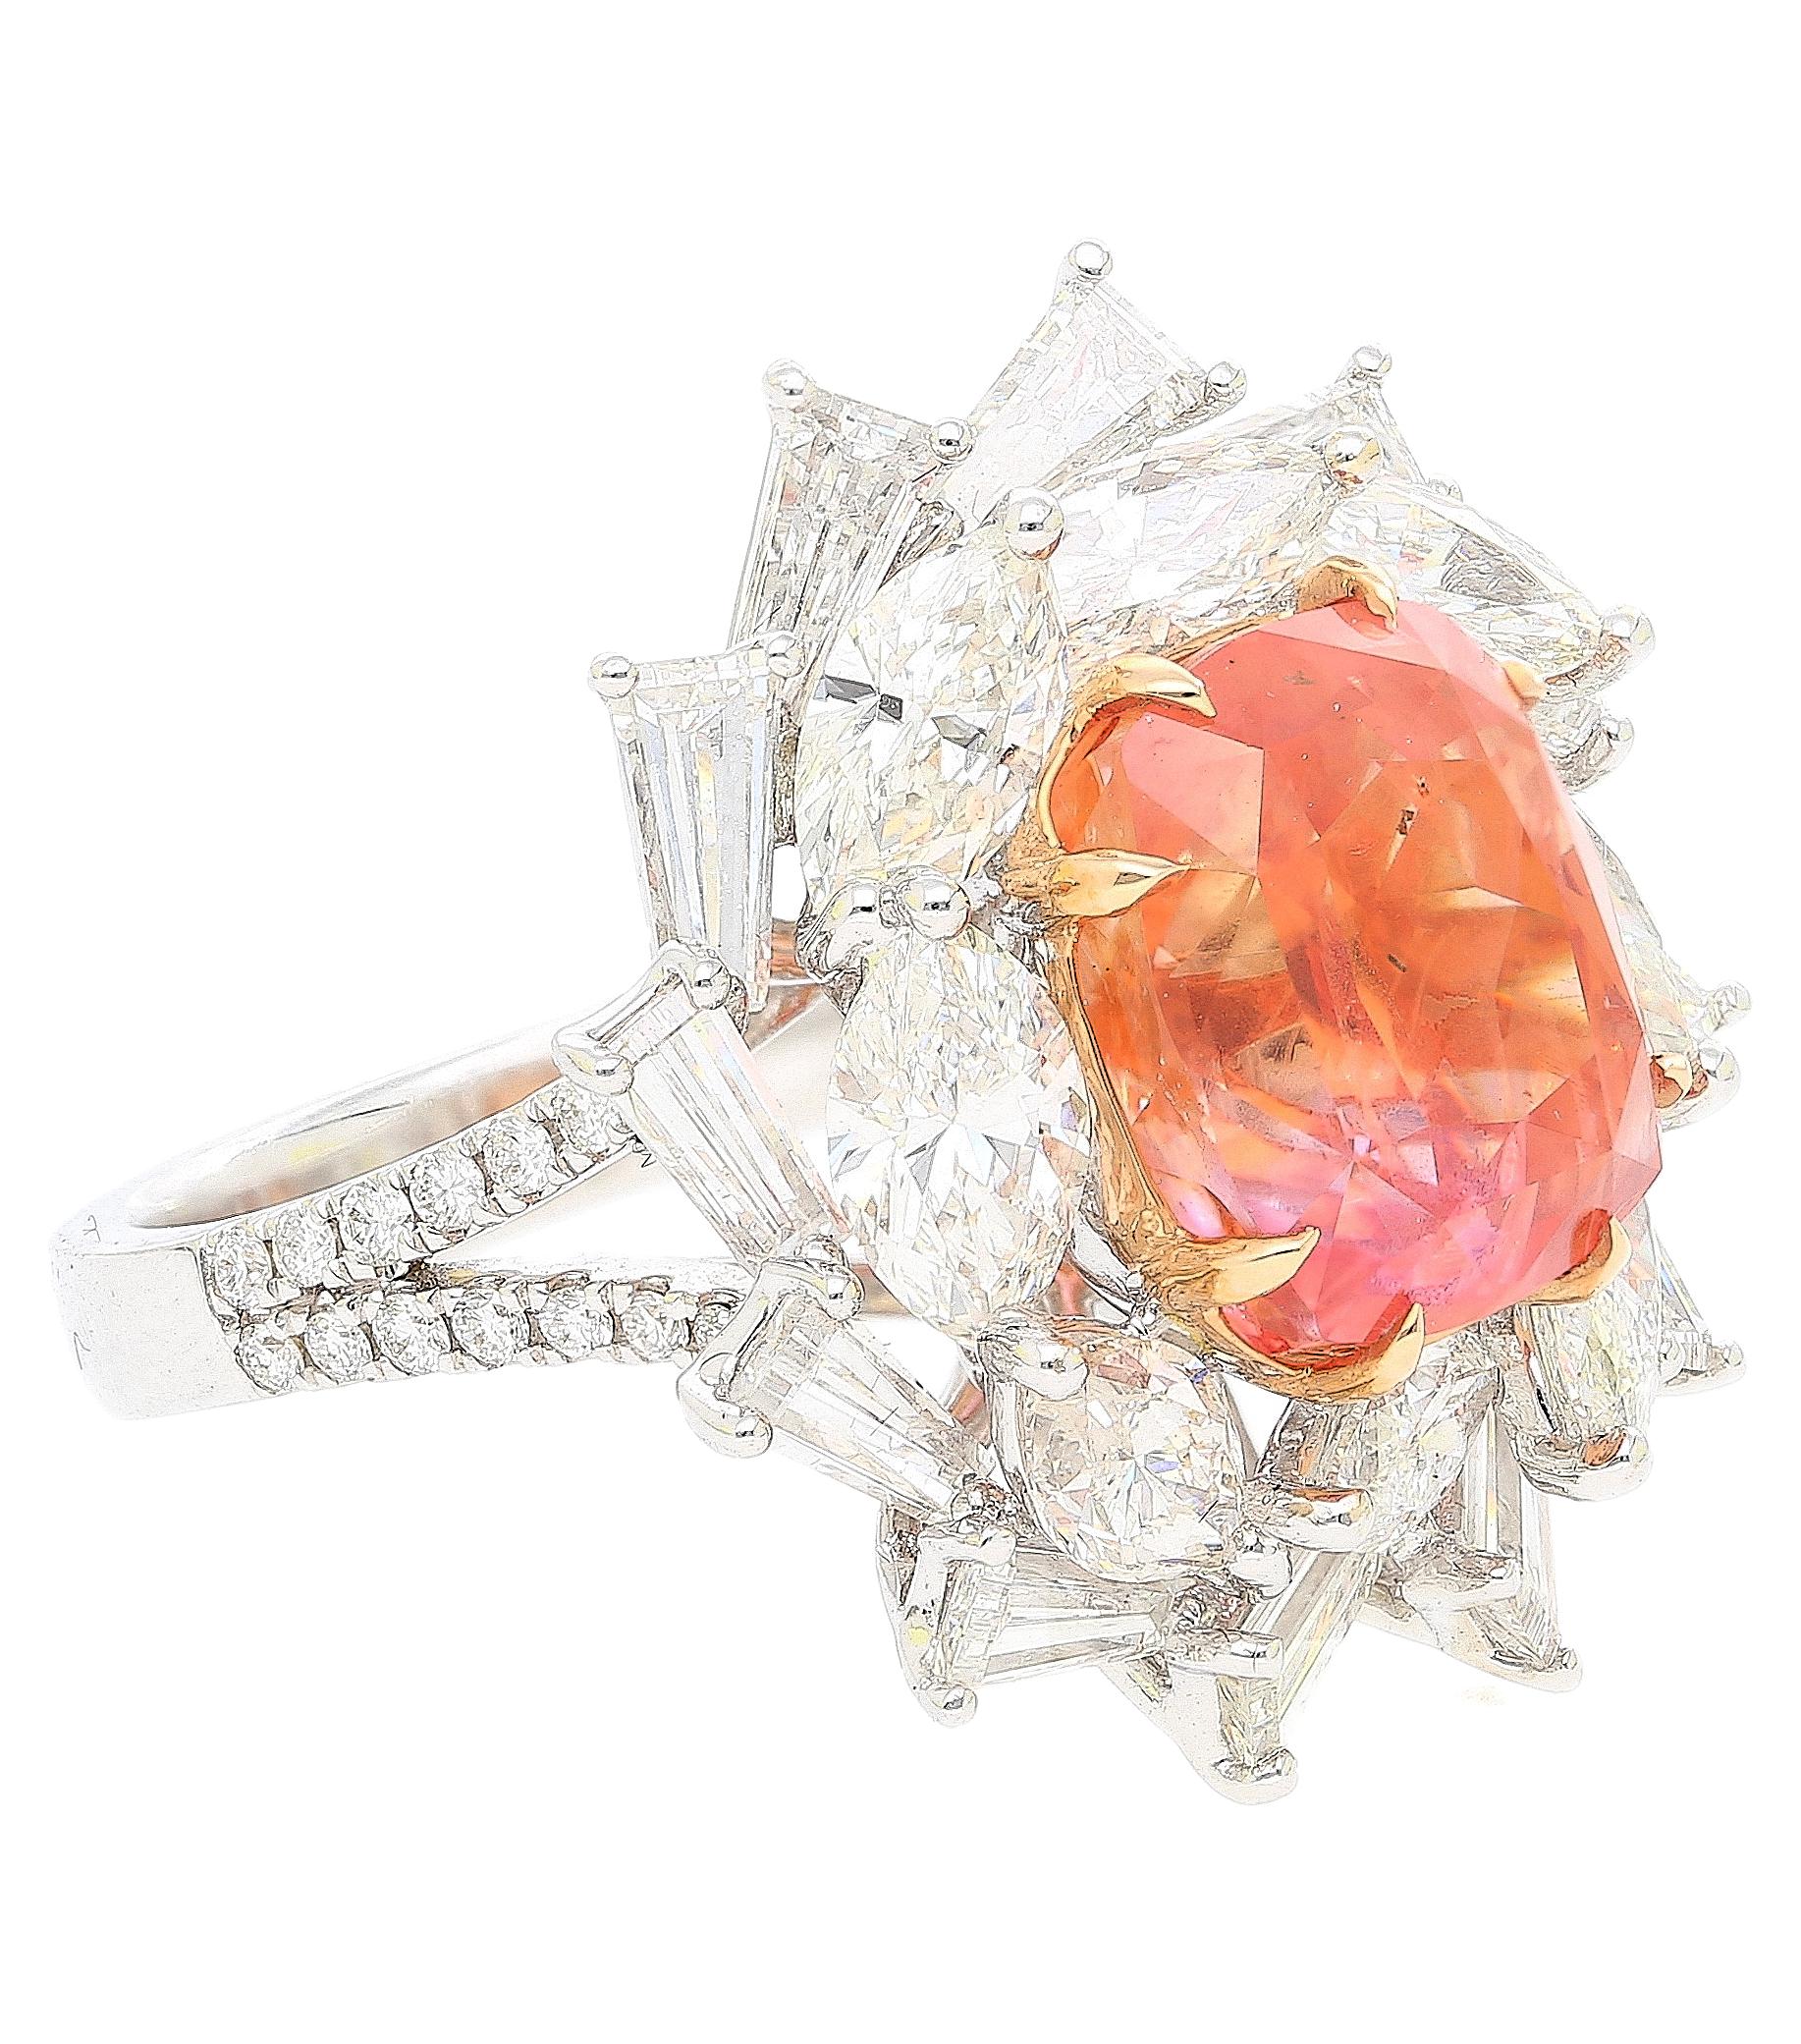 9.10 Carat cushion cut Ceylon no heat Padparadscha Sapphire and mixed cut diamond ring. Mounted in 18k white gold, set with 5.24 carats in marquise, trillion, and round cut diamonds. 

This incredible, extremely rare Sapphire is a true miracle of